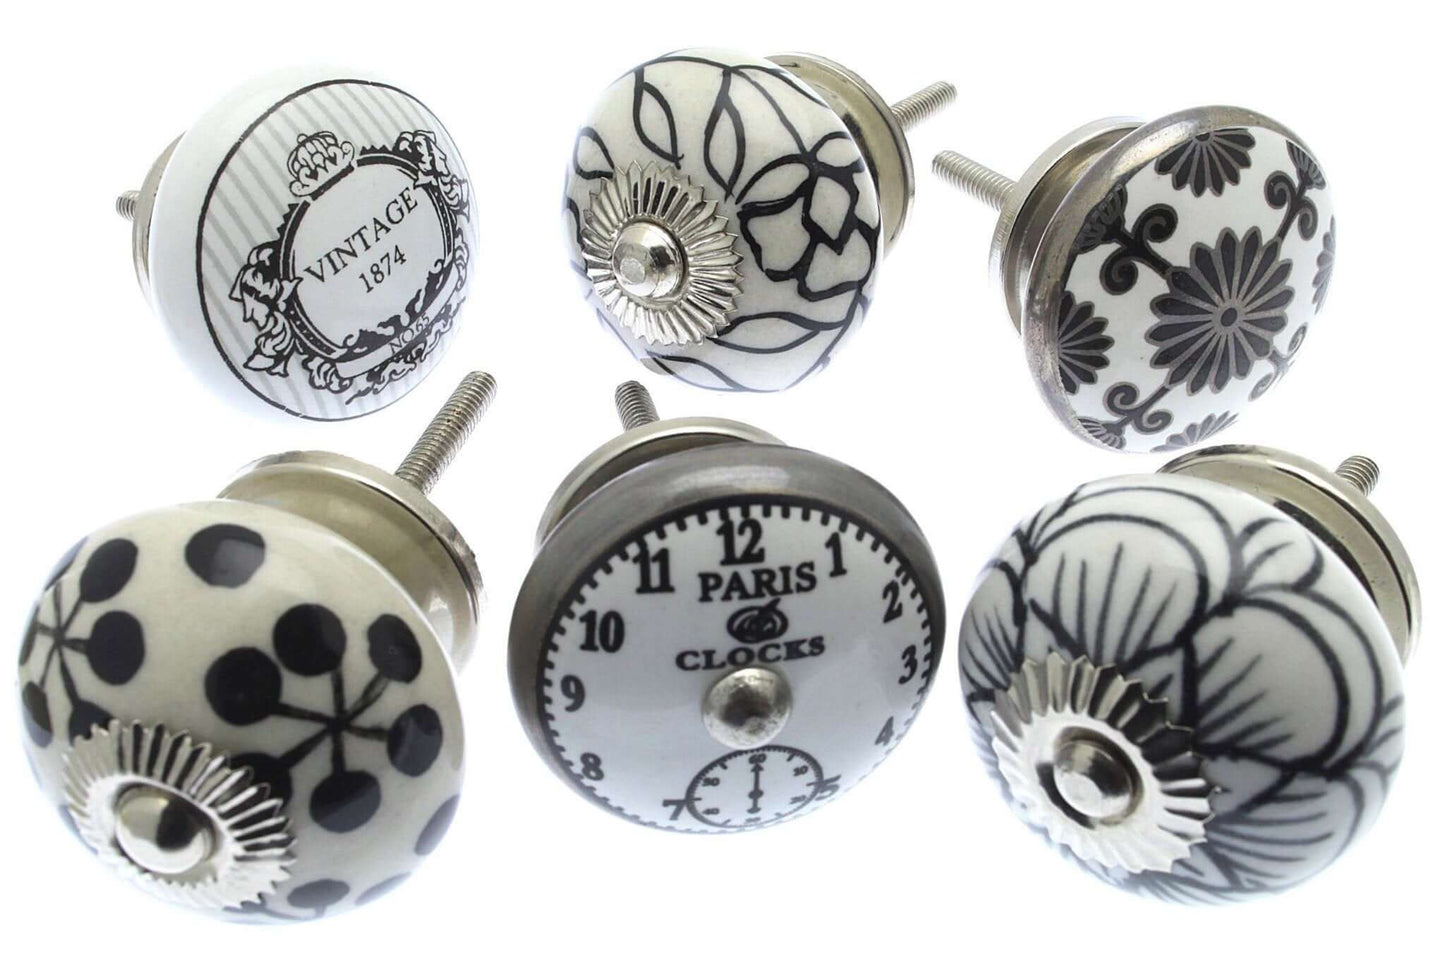 Cupboard Knobs - Set Of 6 Vintage Paris Linen Shabby Chic Ceramic Cupboard Knobs (MG-69)